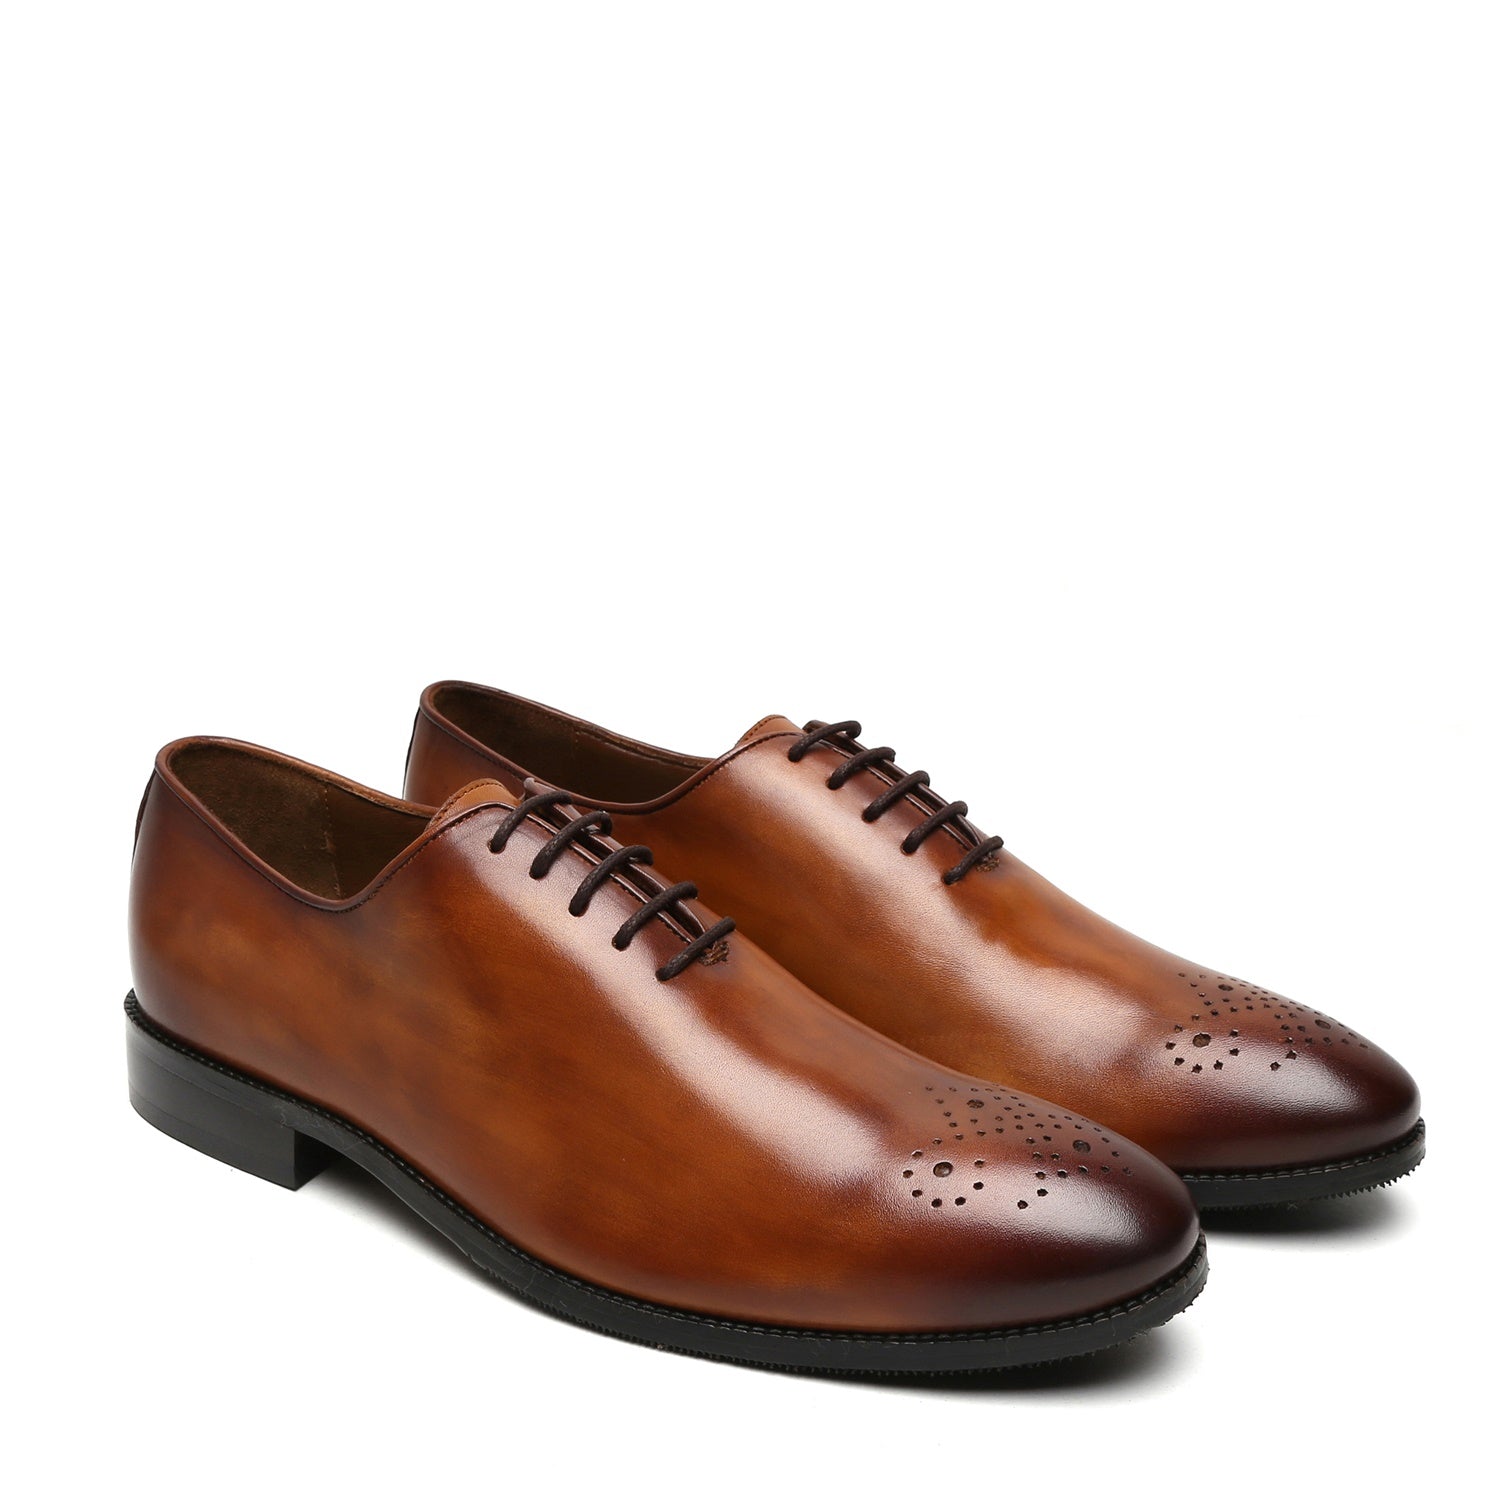 Tan Leather Oxford Lace-Up Shoes Whole Cut/One Piece Medallion Toe